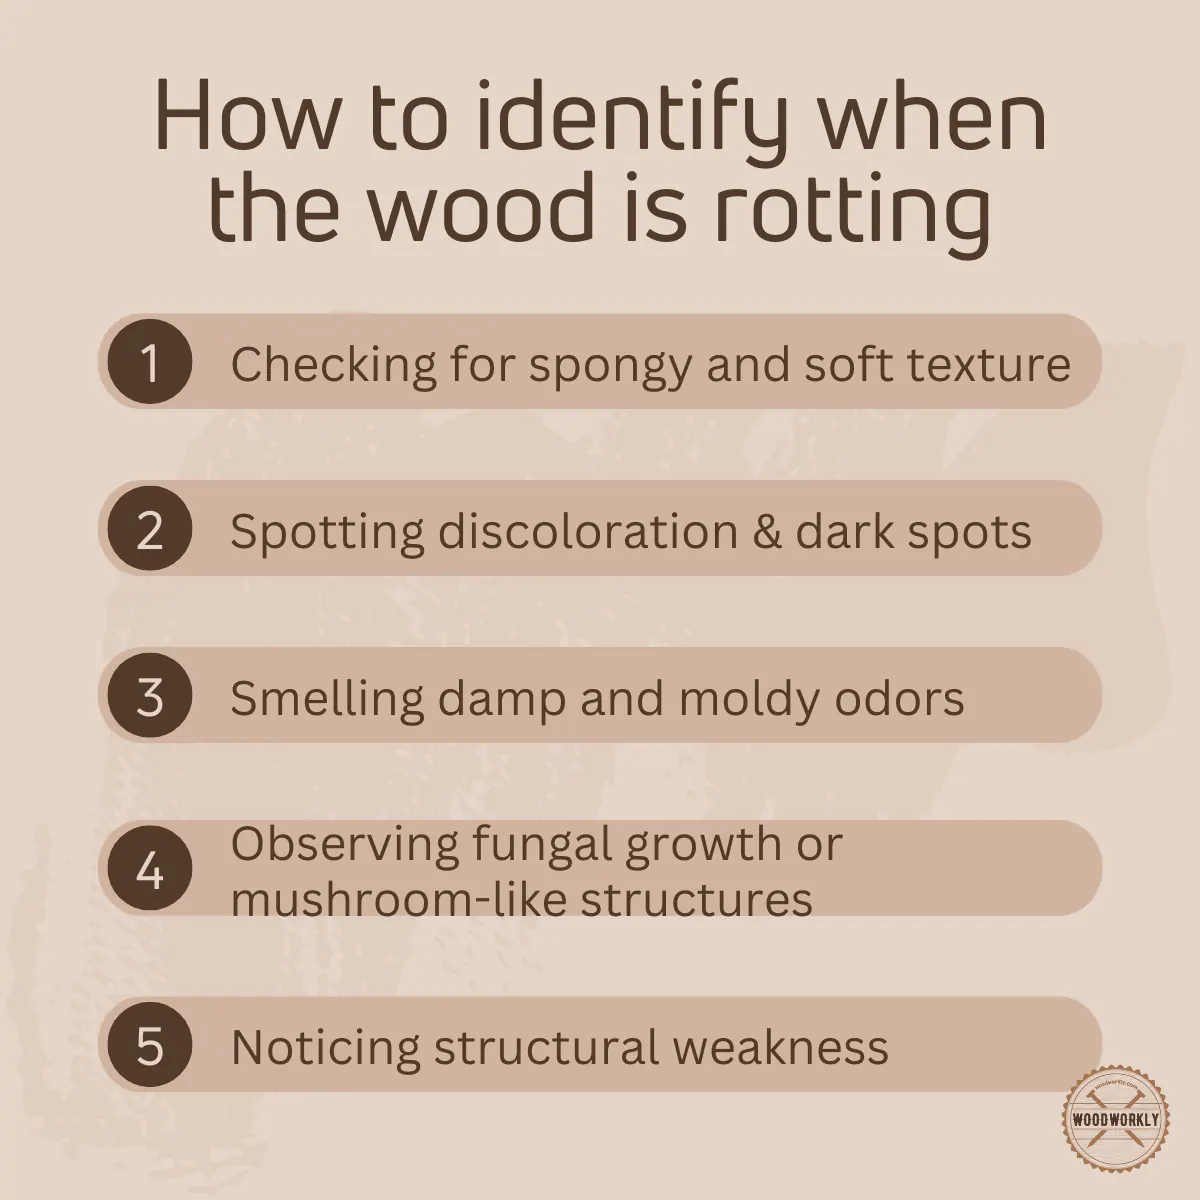 How to identify when the wood is rotting